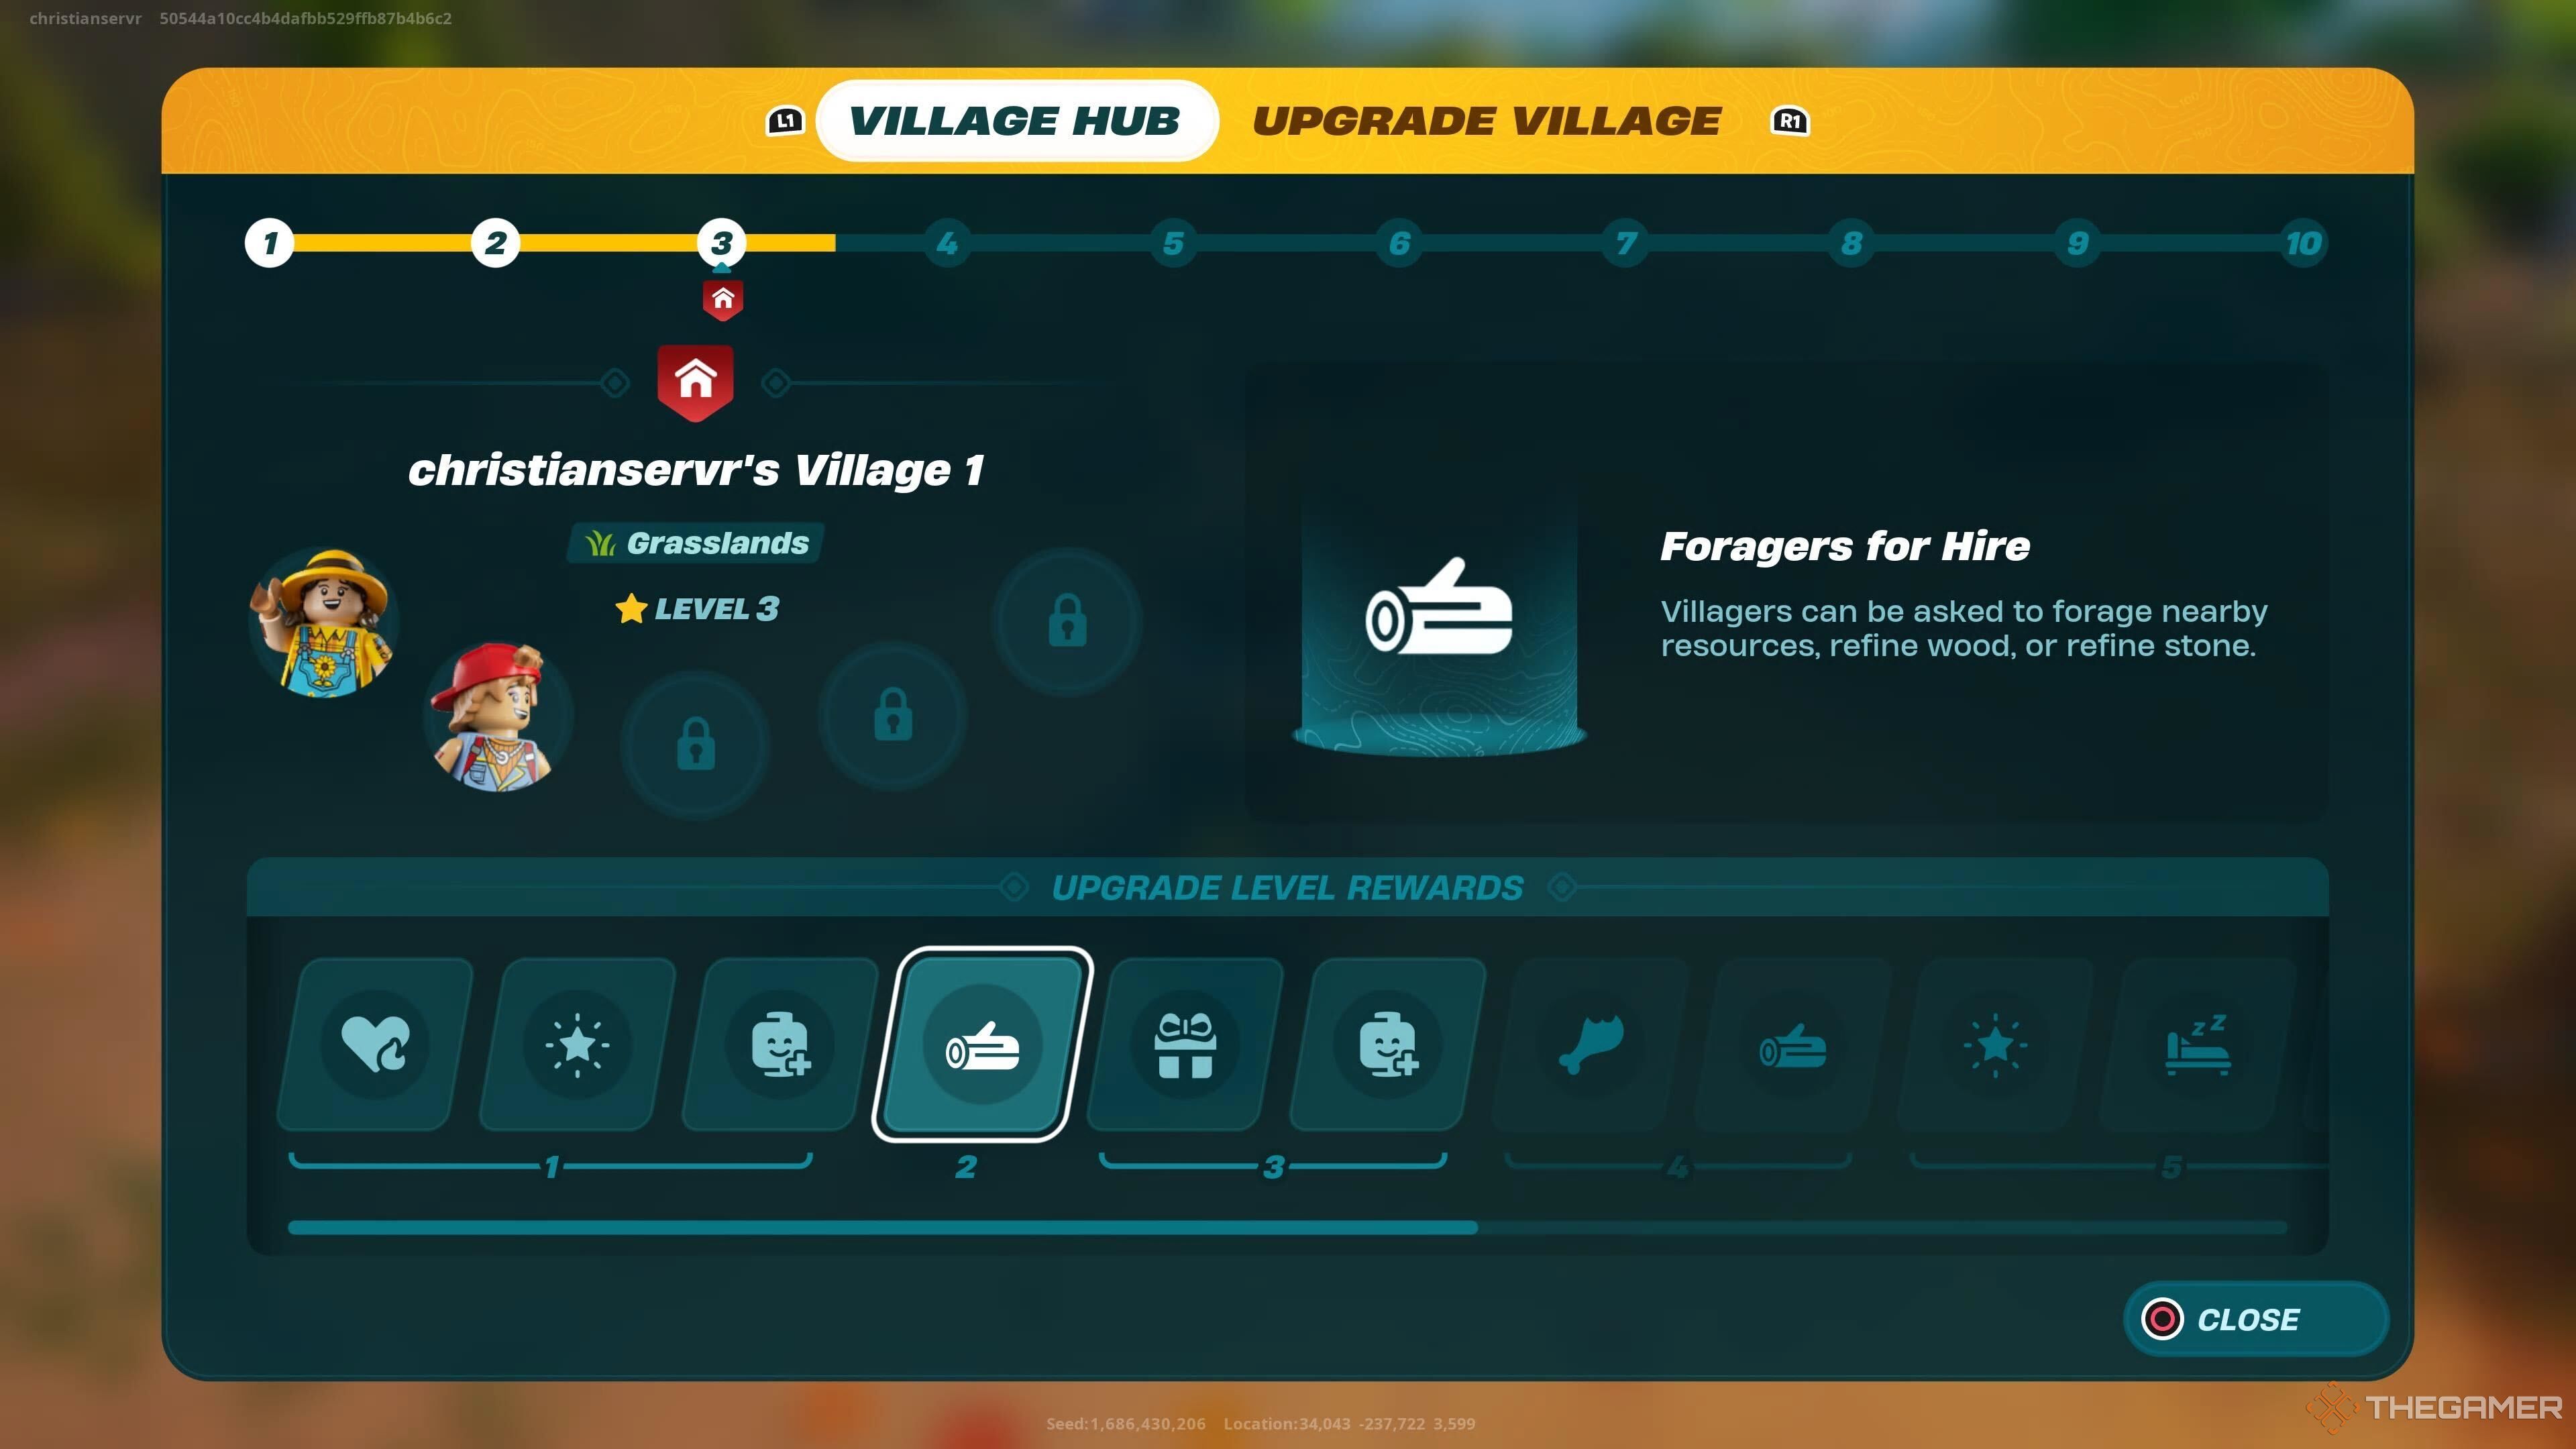 A screenshot from Lego Fortnite showing the village center menu with the Forager Job unlockable highlighted. It allows the player to ask villagers to collect wood and other local resources 